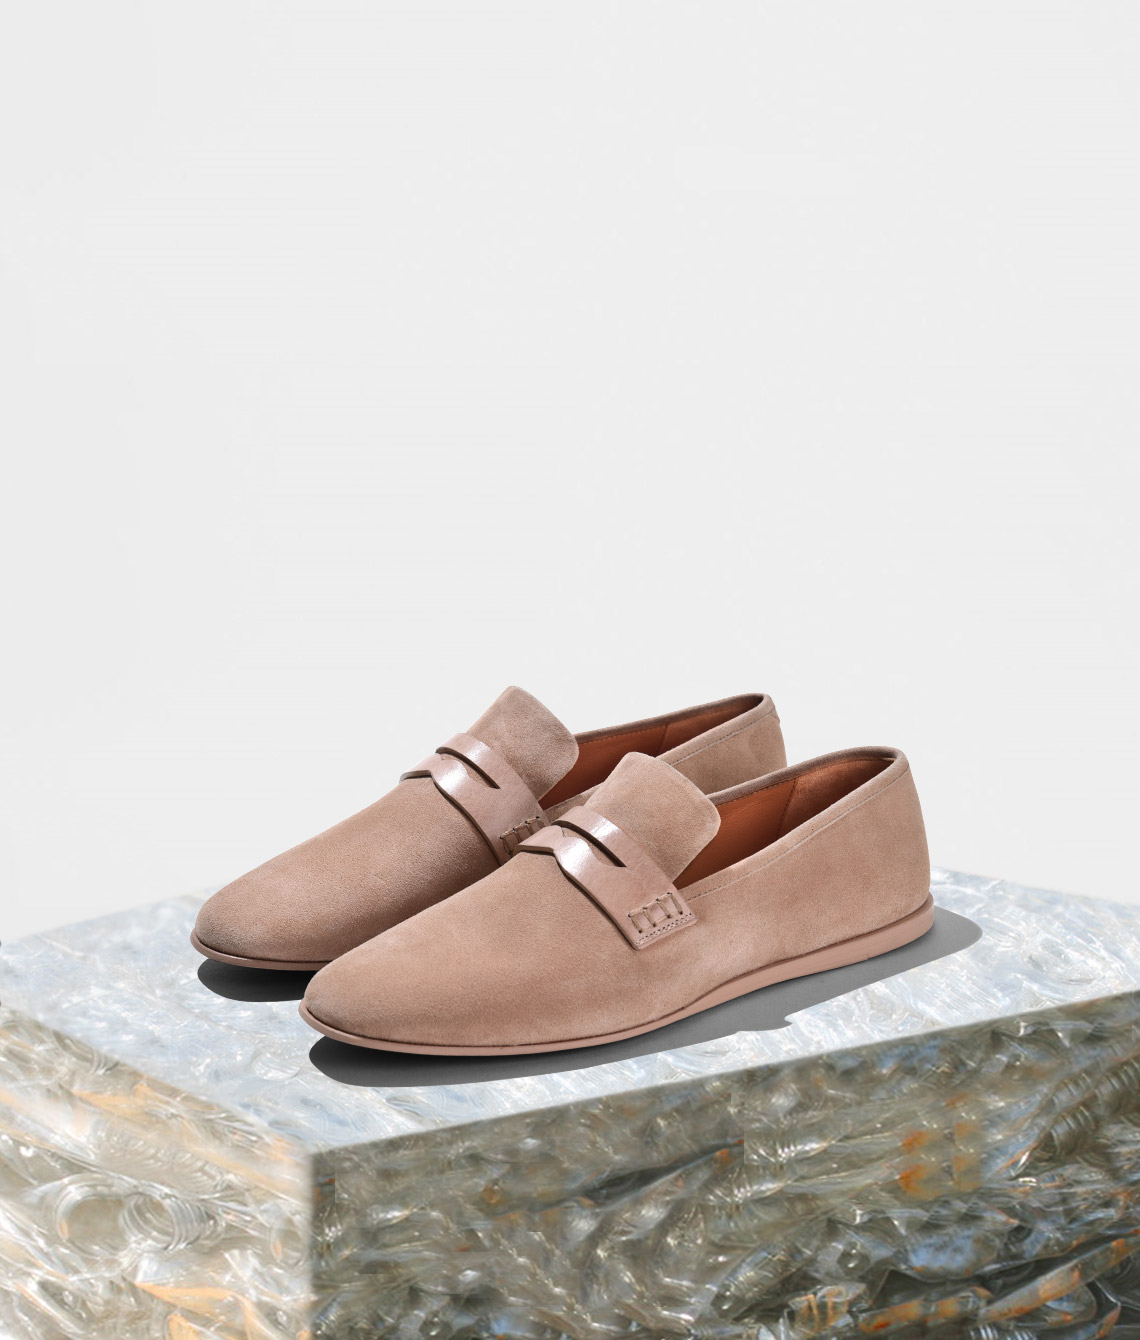 31520 / ELONGATED LOAFER